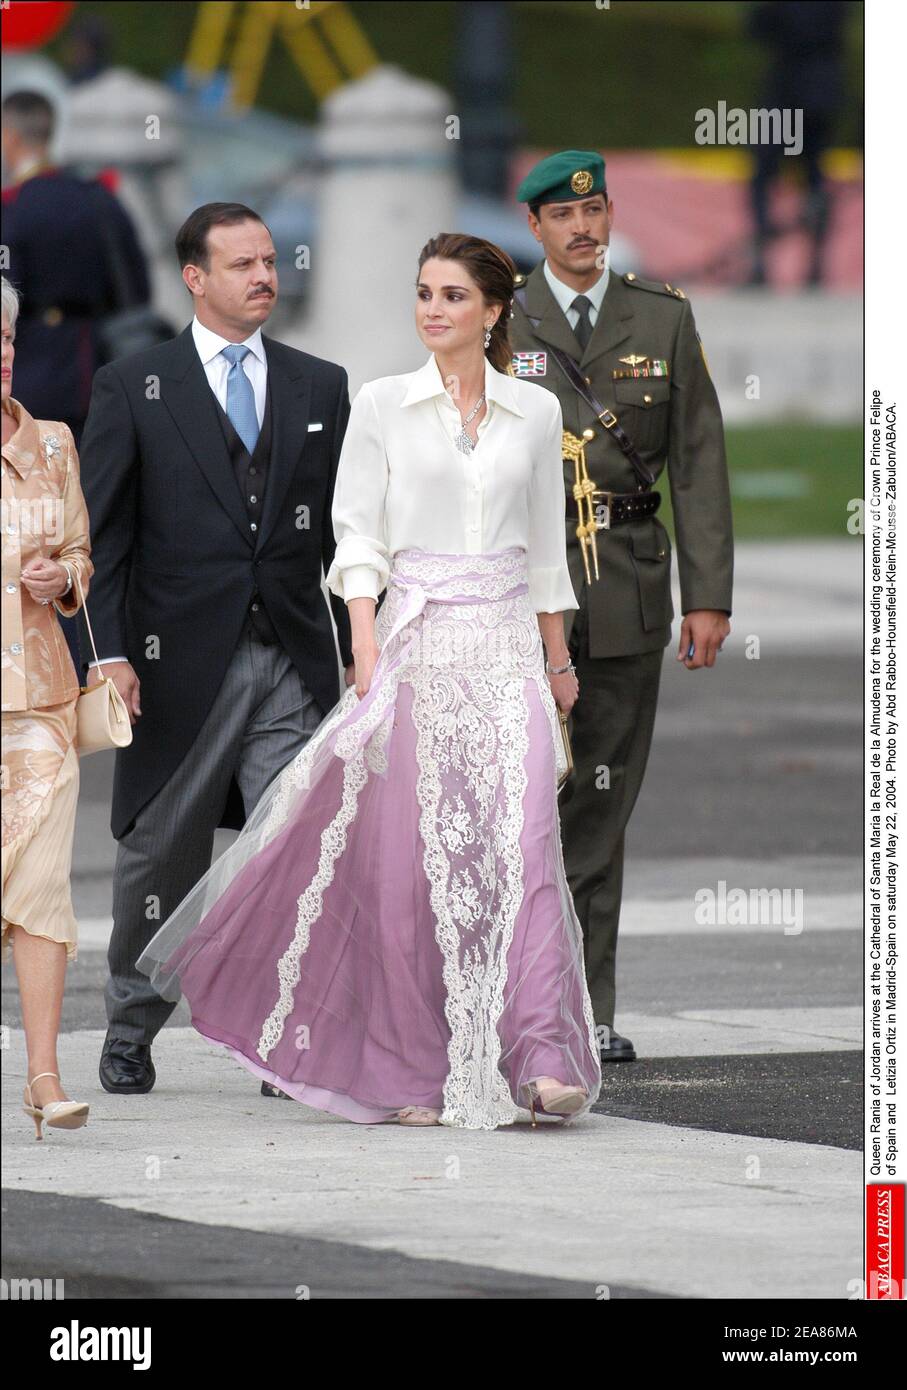 Queen Rania of Jordan arrives at the Cathedral of Santa Maria la Real de la Almudena for the wedding ceremony of Crown Prince Felipe of Spain and Letizia Ortiz in Madrid-Spain on saturday May 22, 2004. Photo by Abd Rabbo-Hounsfield-Klein-Mousse-Zabulon/ABACA. Stock Photo